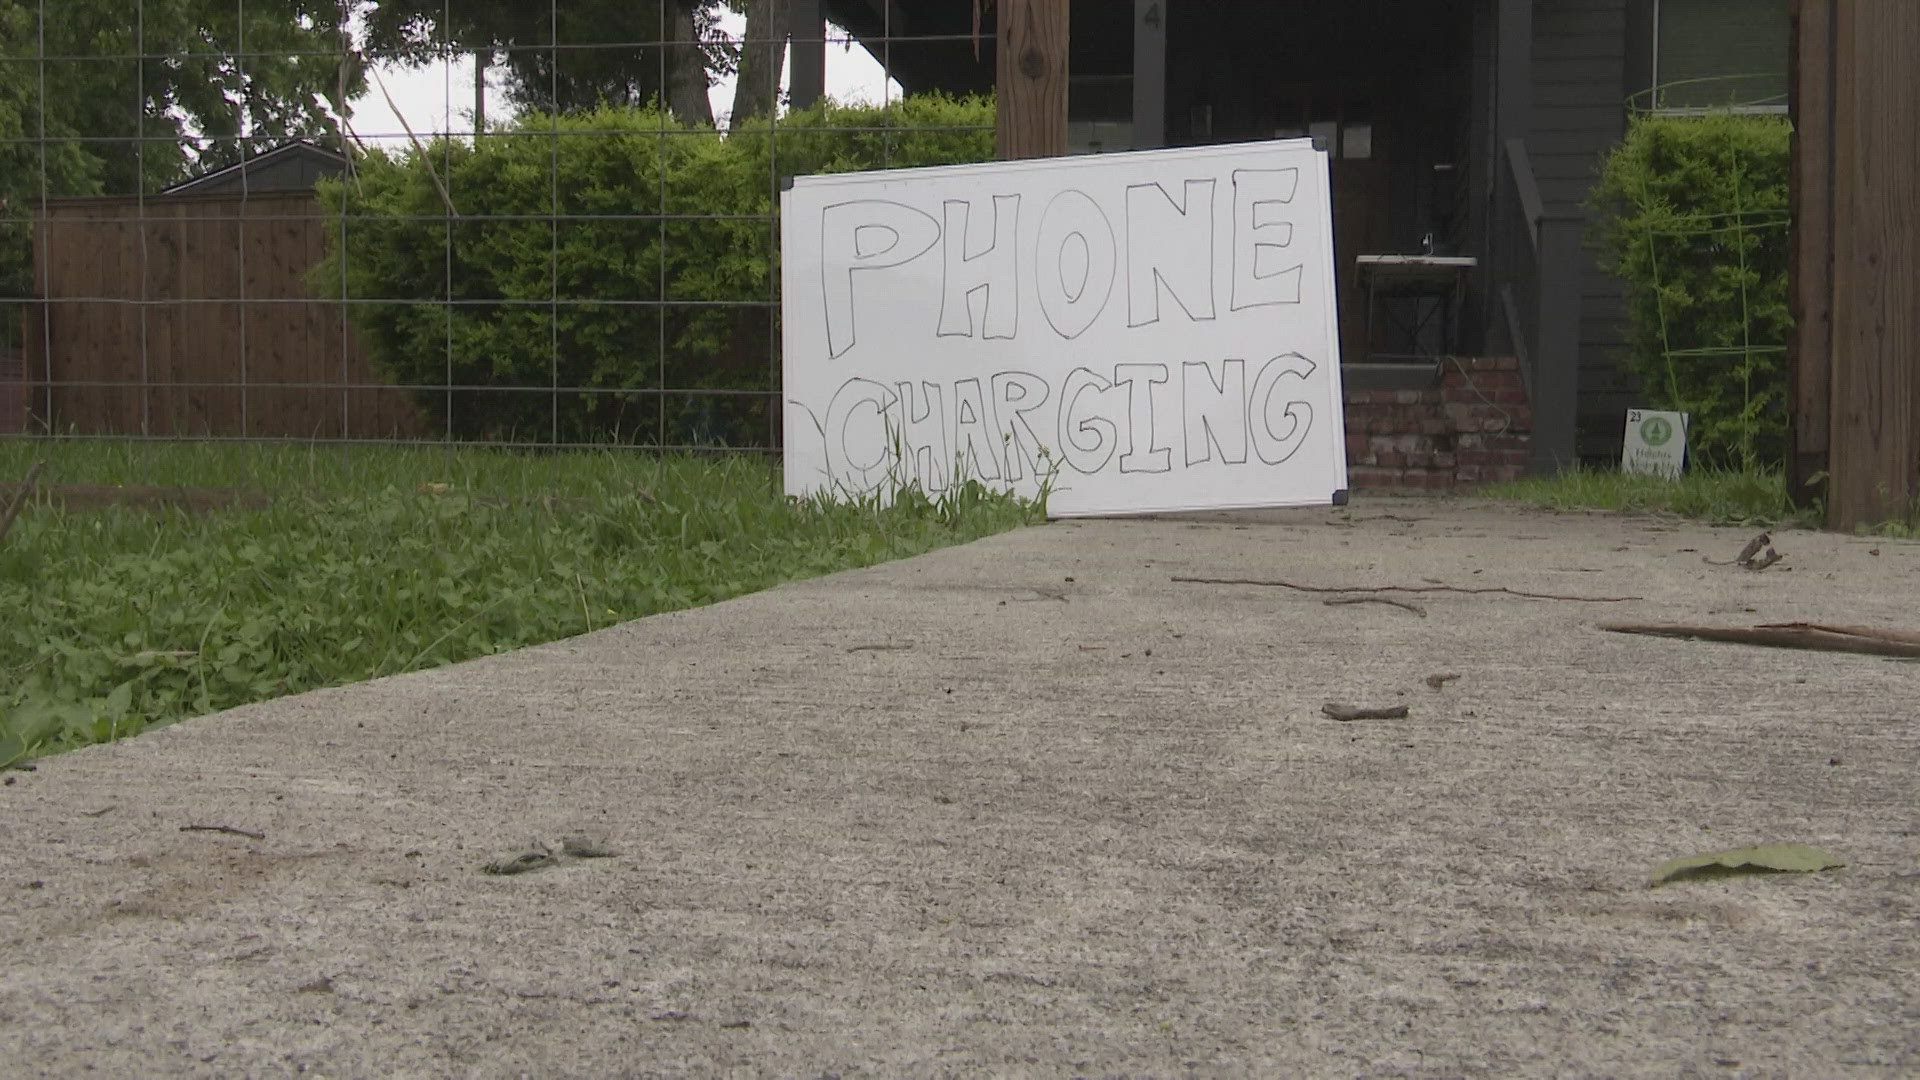 The couple is providing a spot for their neighbors to stay connected amid widespread power outages.